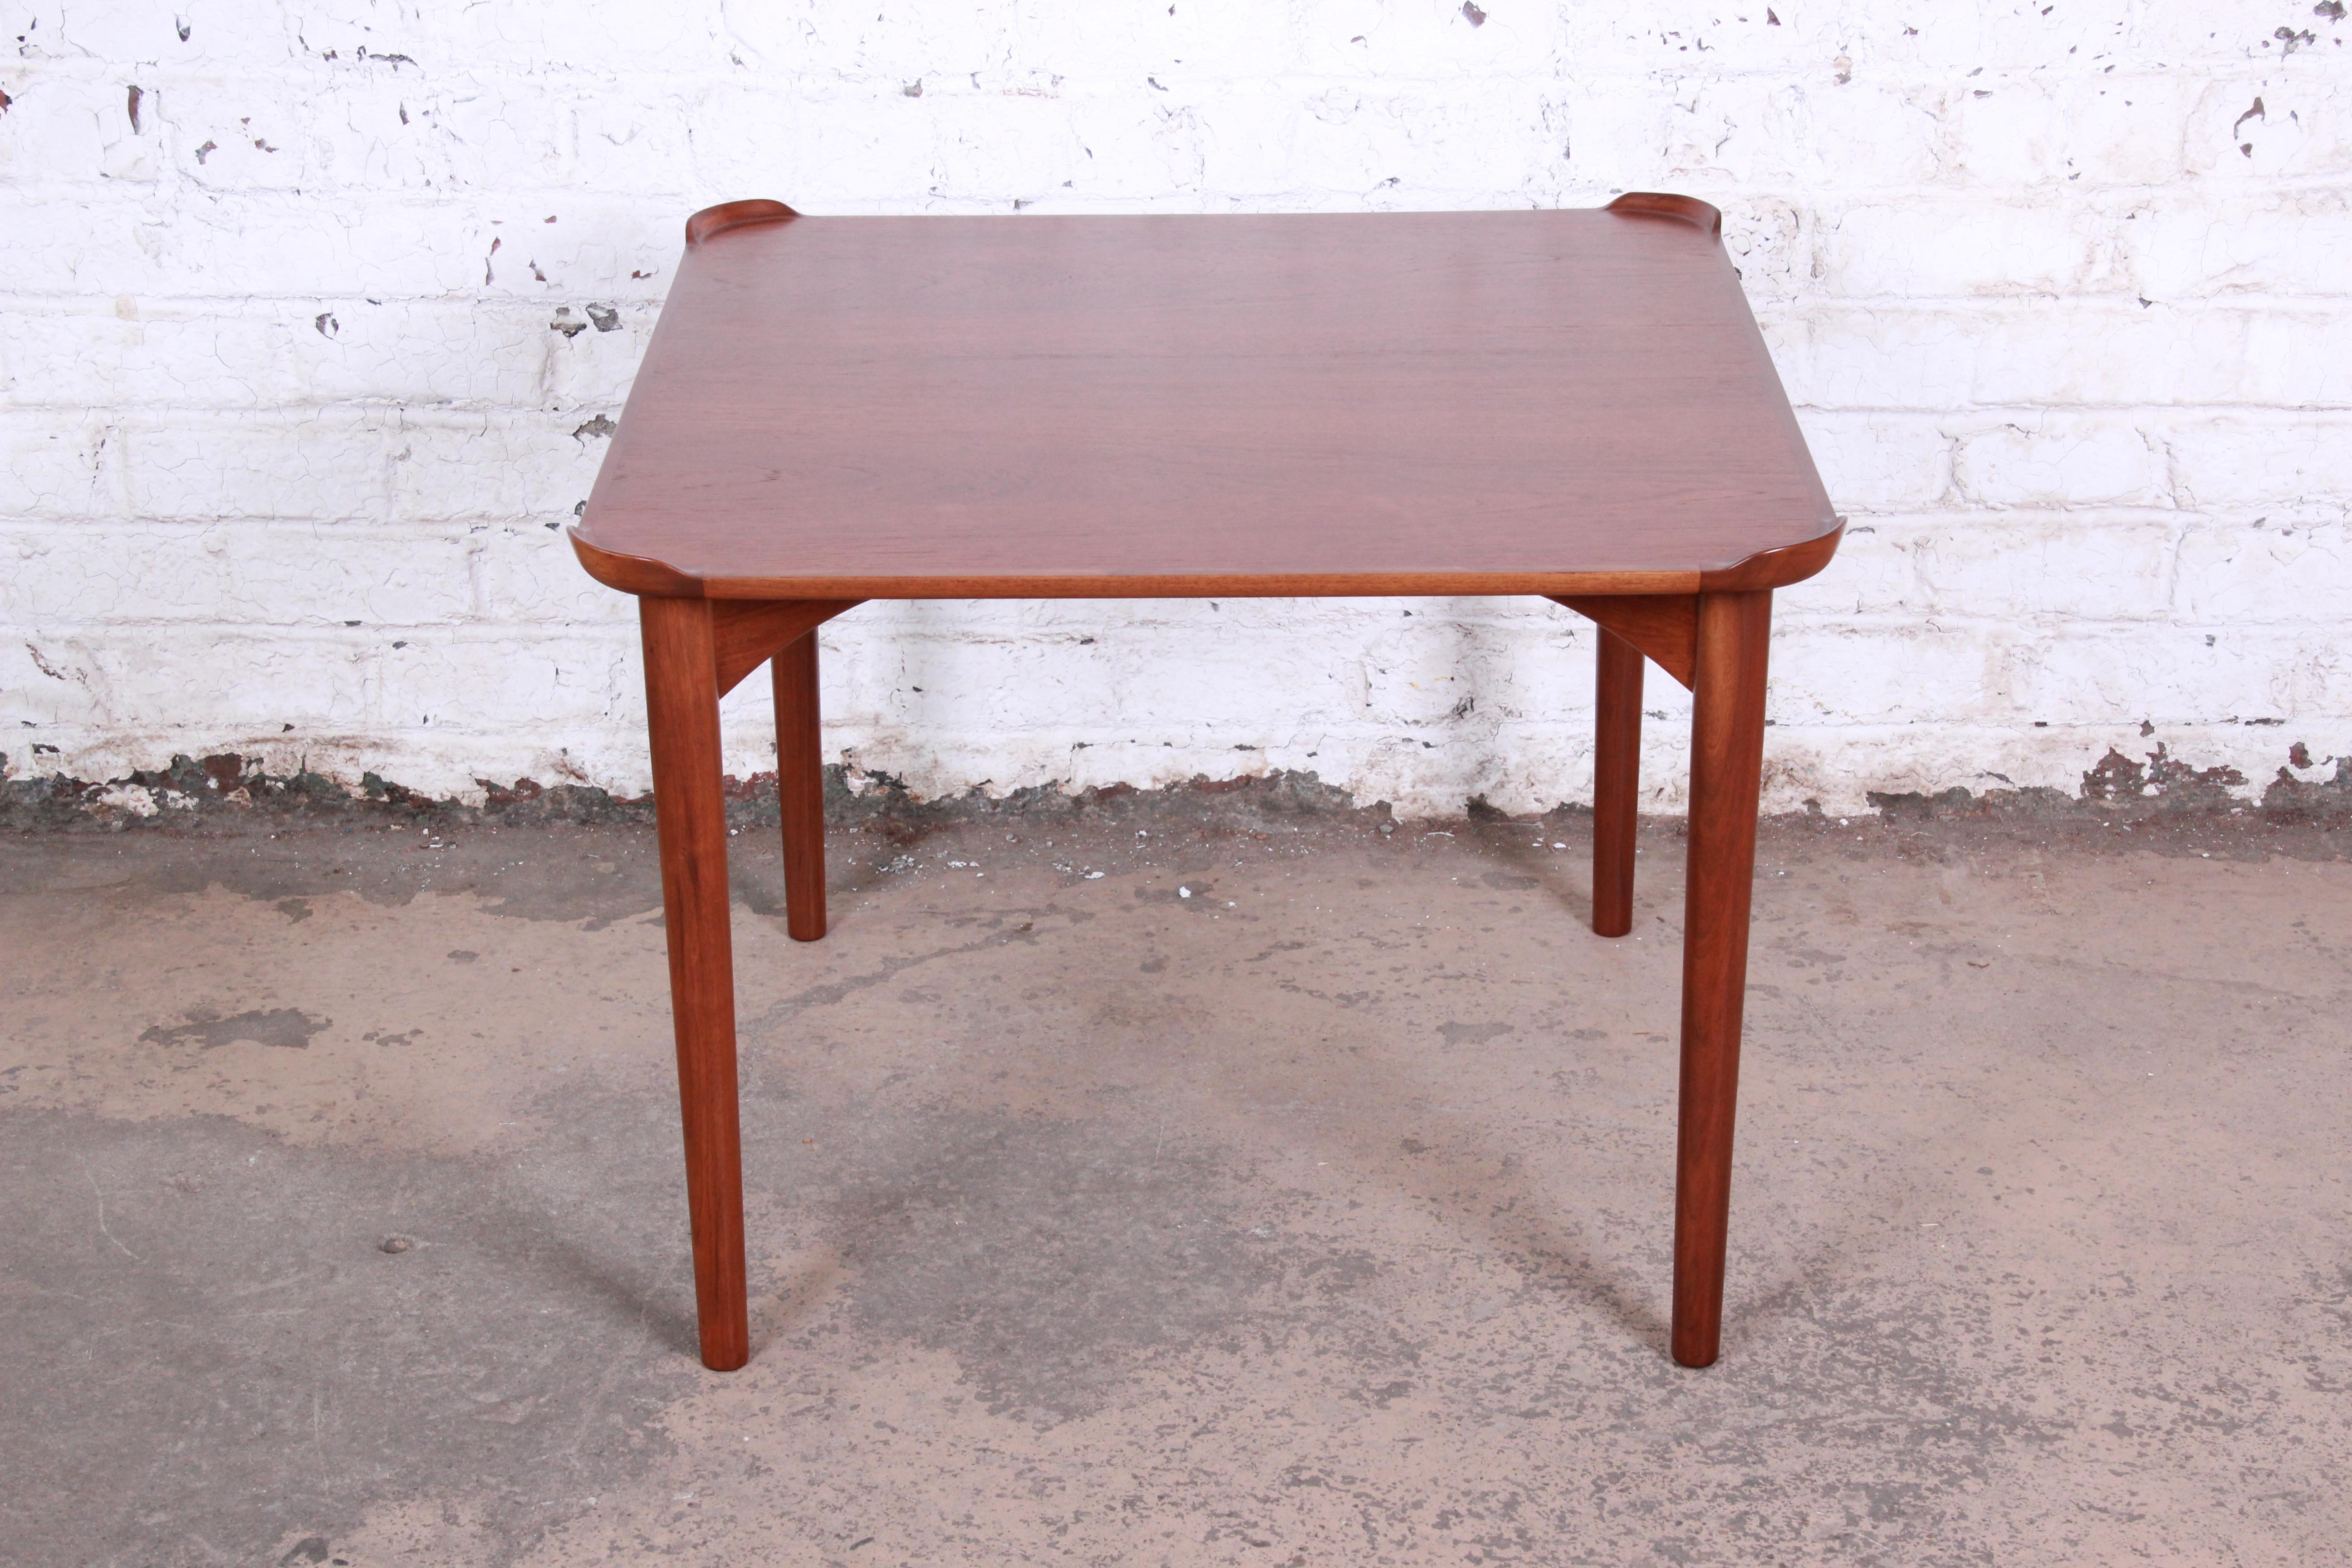 A handsome teak game table designed by Danish architect Finn Juhl for Baker Furniture. The table features stunning teak wood grain and unique carved corner drink backsplashes. Minimalist mid-century Danish Modern design at its finest. The table has